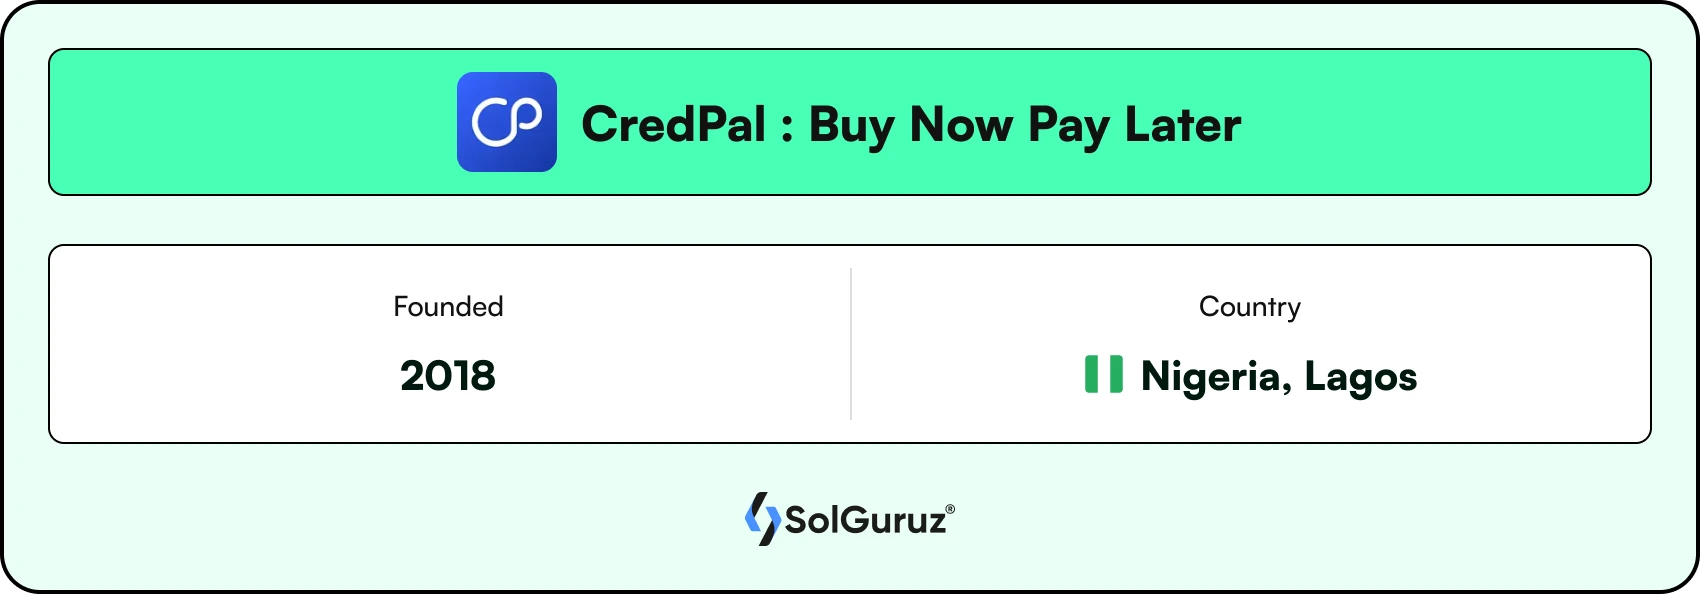 CredPal - Buy Now Pay Later BNPL app in Nigeria